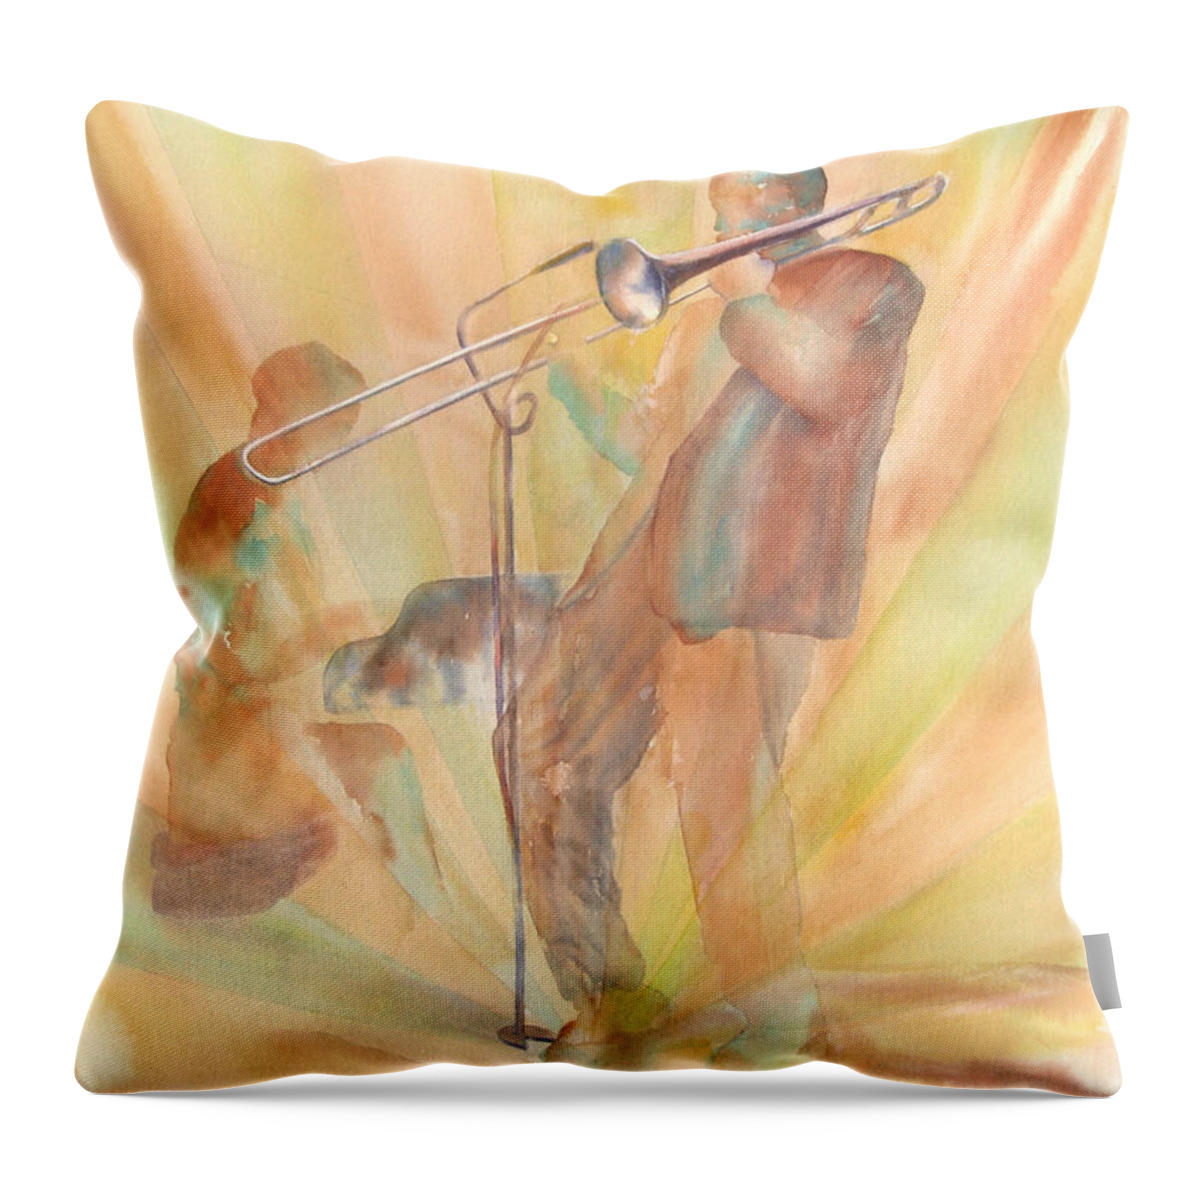 Watercolor Throw Pillow featuring the painting At One With the Music by Debbie Lewis